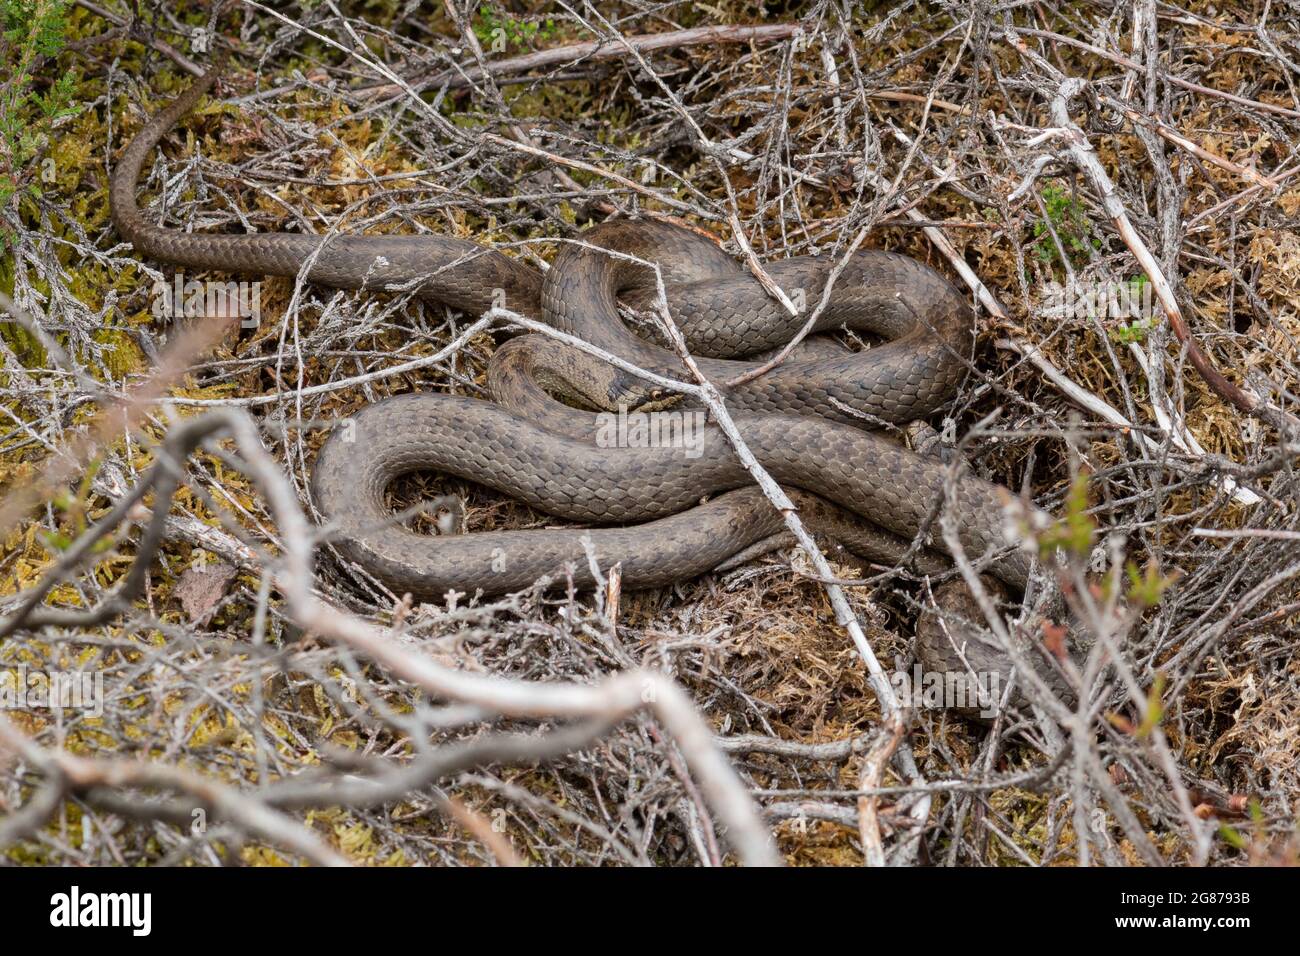 Two smooth snakes (Coronella austriaca) basking together, a rare reptile species in Surrey heathland, England, UK Stock Photo